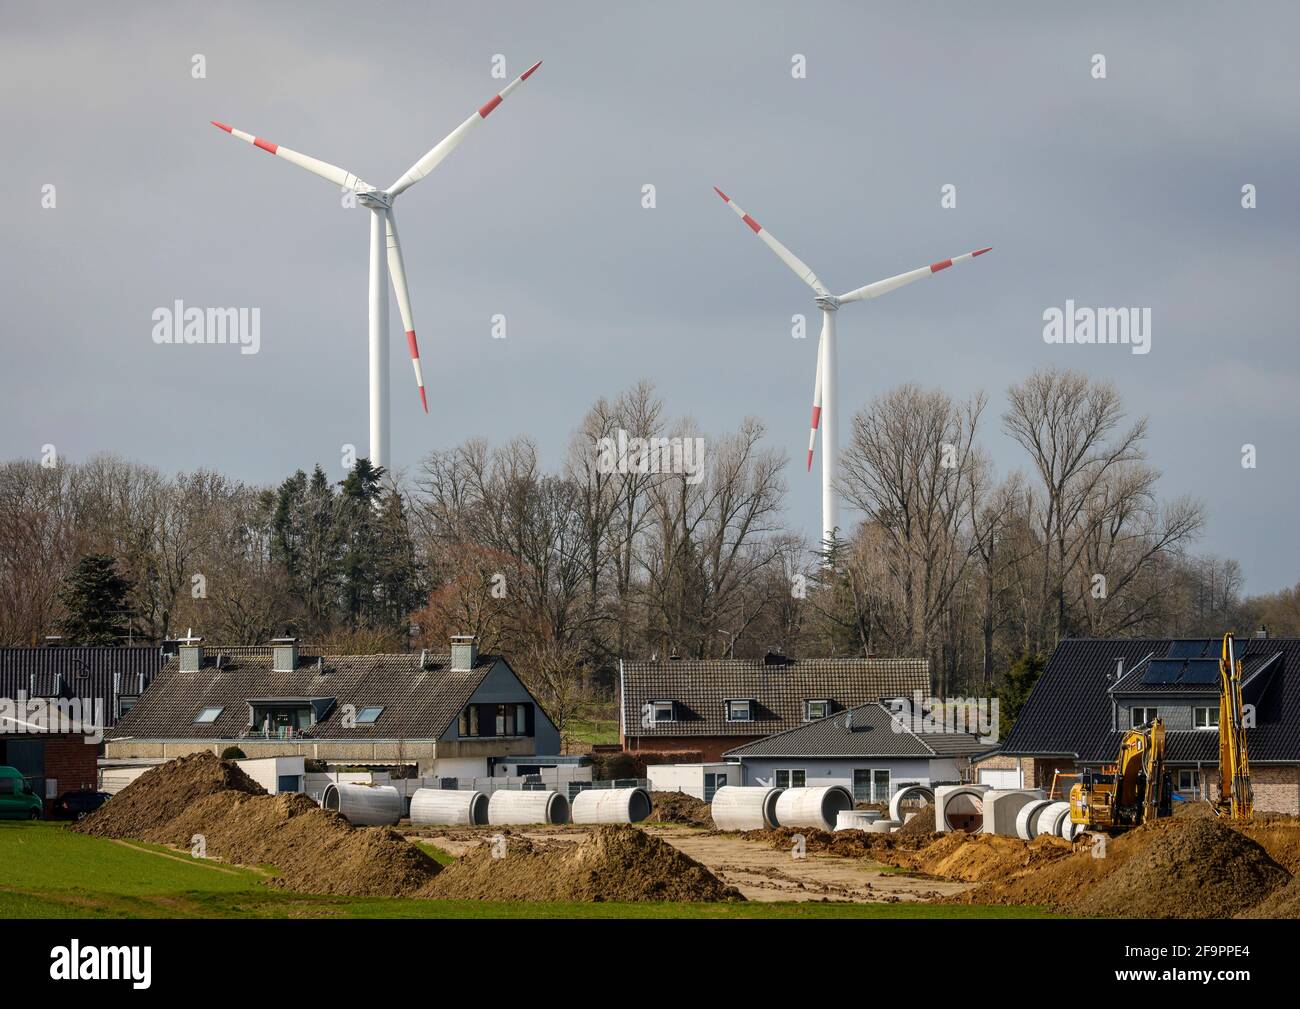 16.03.2021, Juechen, North Rhine-Westphalia, Germany - Canal construction in new housing estate in front of wind farm at RWE opencast lignite mine Gar Stock Photo